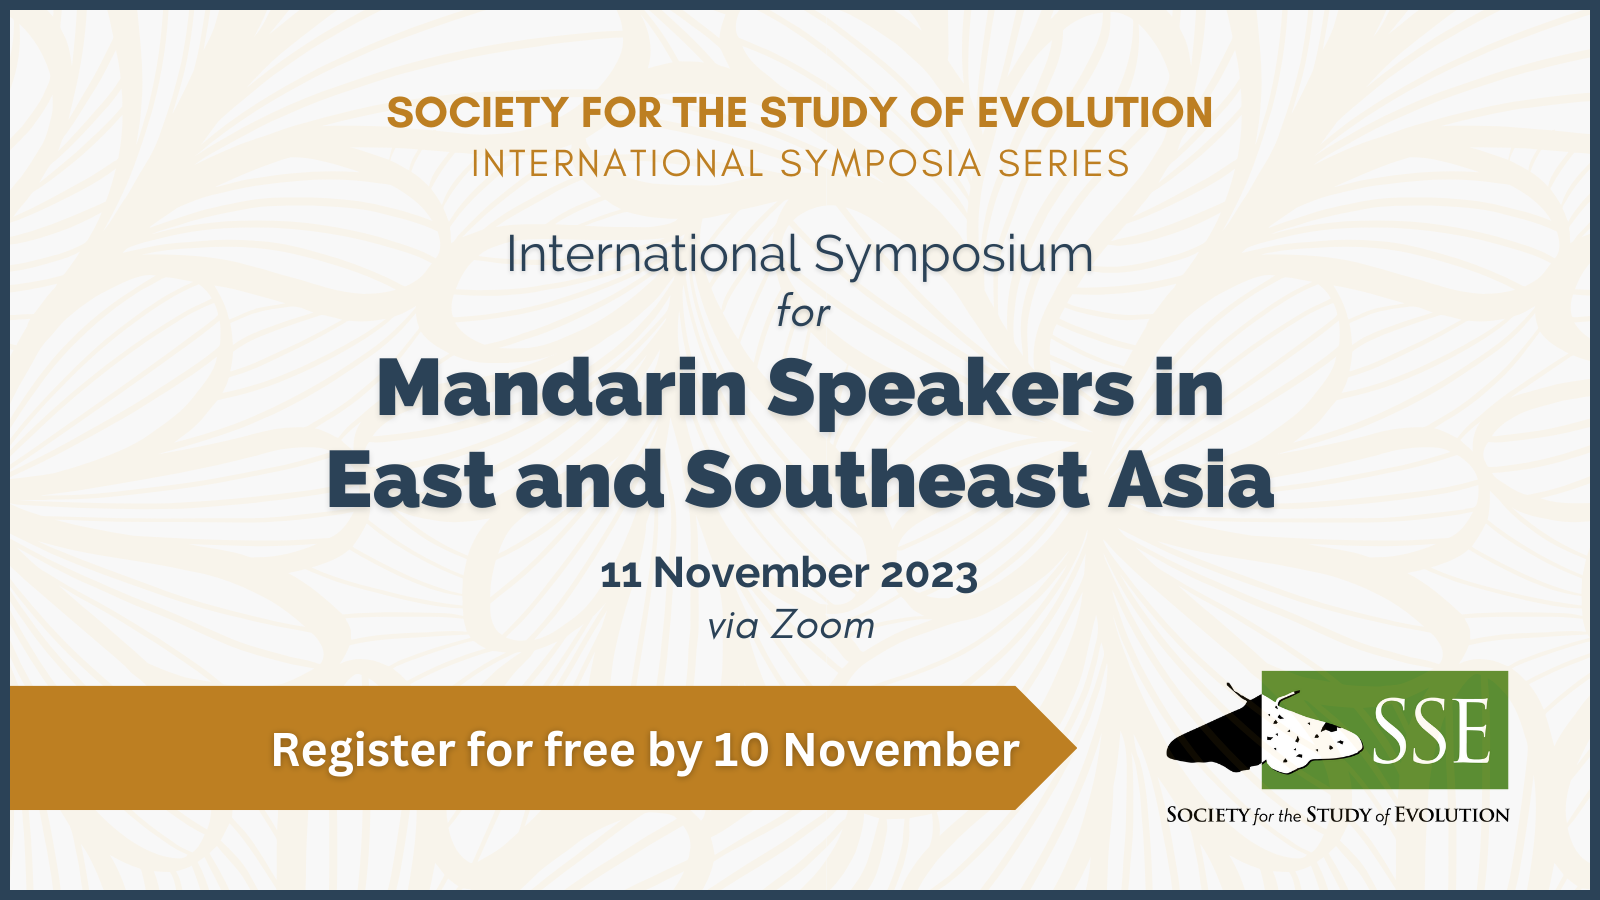 Text: Society for the Study of Evolution International Symposia Series, International Symposium for Mandarin Speakers in East and Southeast Asia, 11 November 2023 via Zoom. Register for free by 10 November. SSE logo.